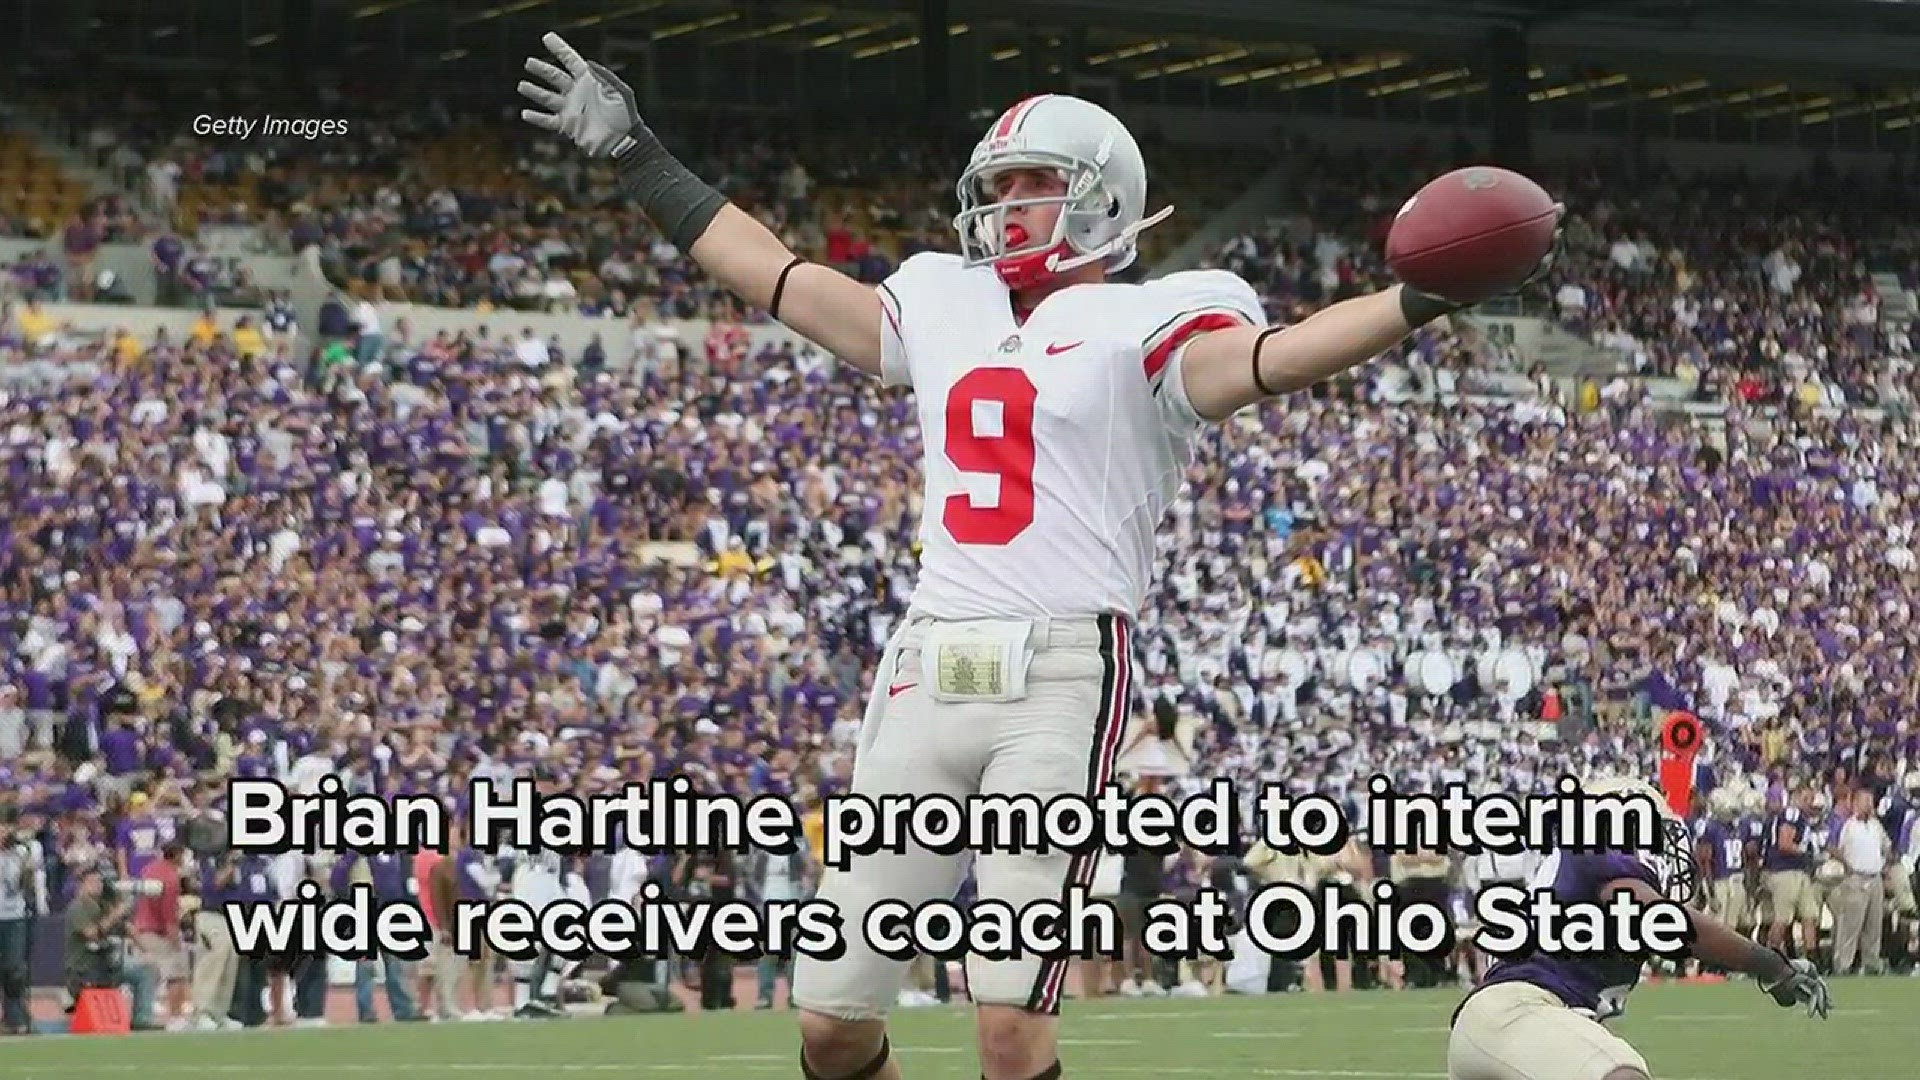 Brian Hartline promoted to interim wide receivers coach at Ohio State